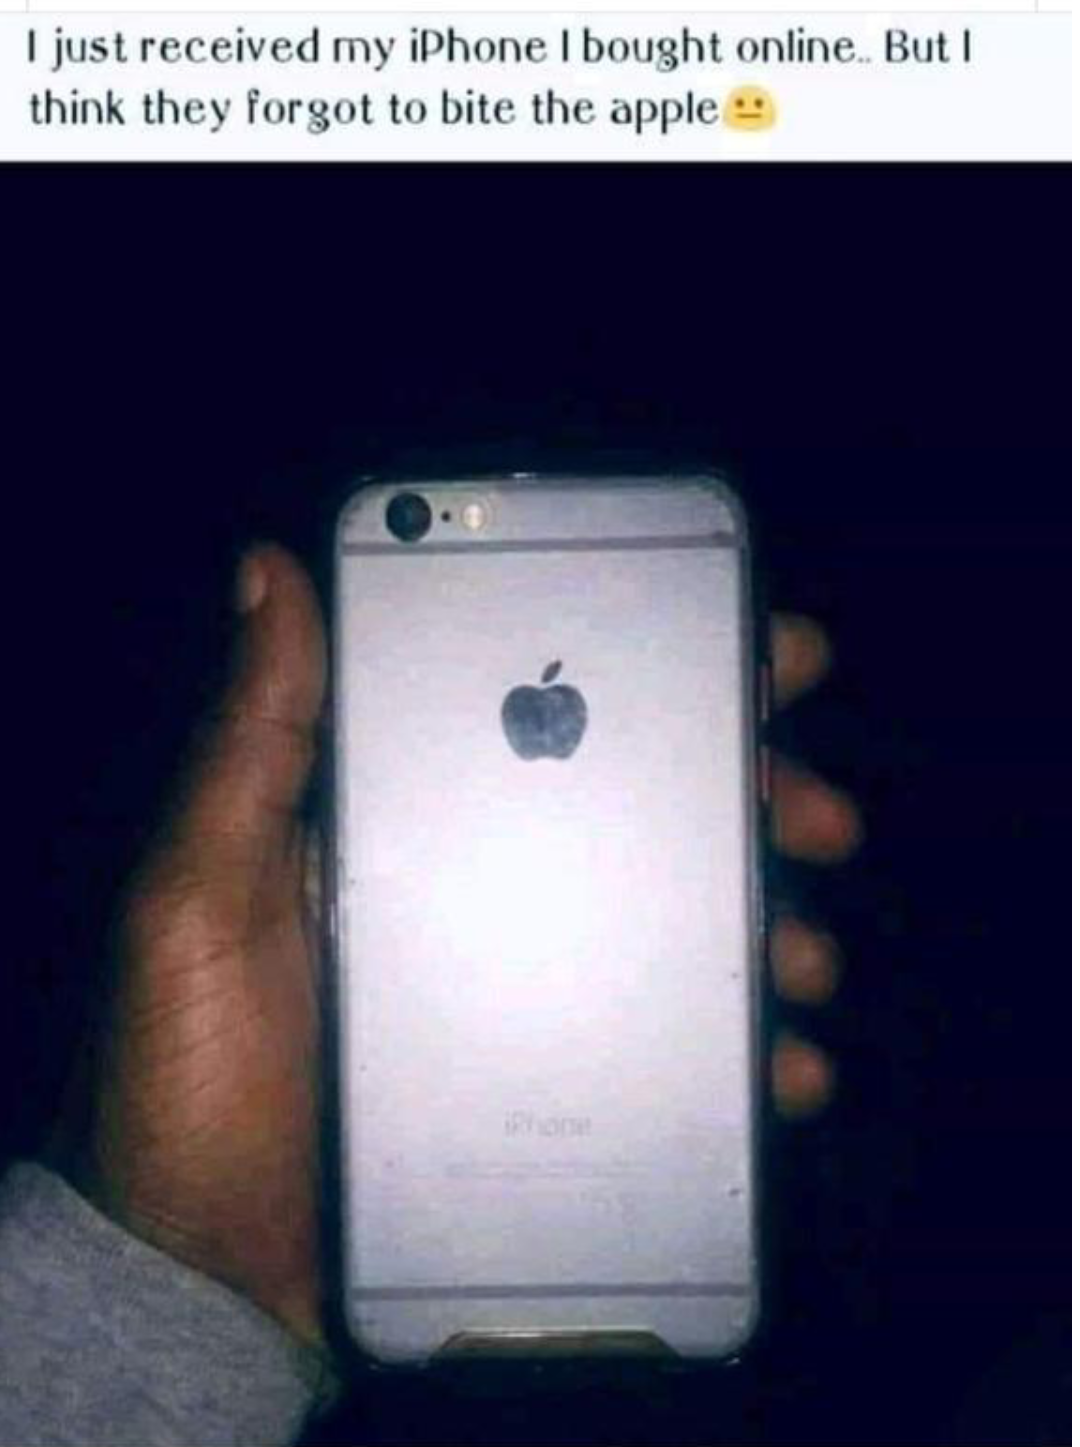 smartphone - I just received my iPhone I bought online. But think they forgot to bite the apple